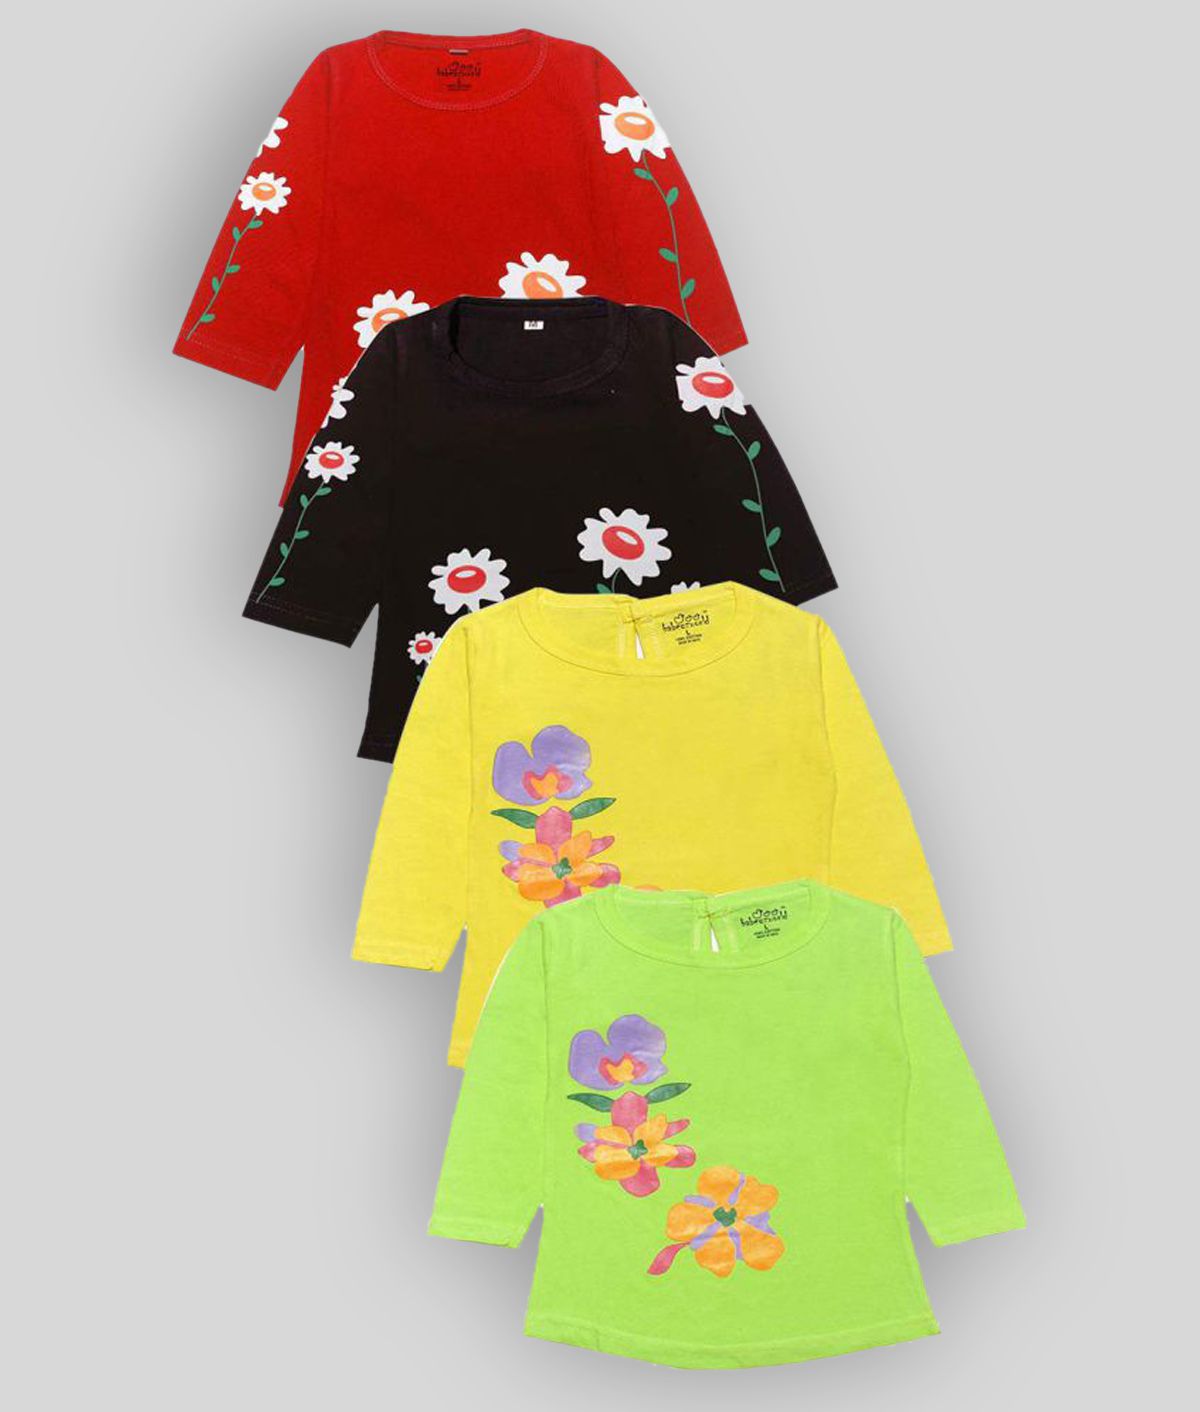     			babeezworld Red, Yellow, Black and Green Baby Girl's top Multicolour, 6-12 Months Pack of 4